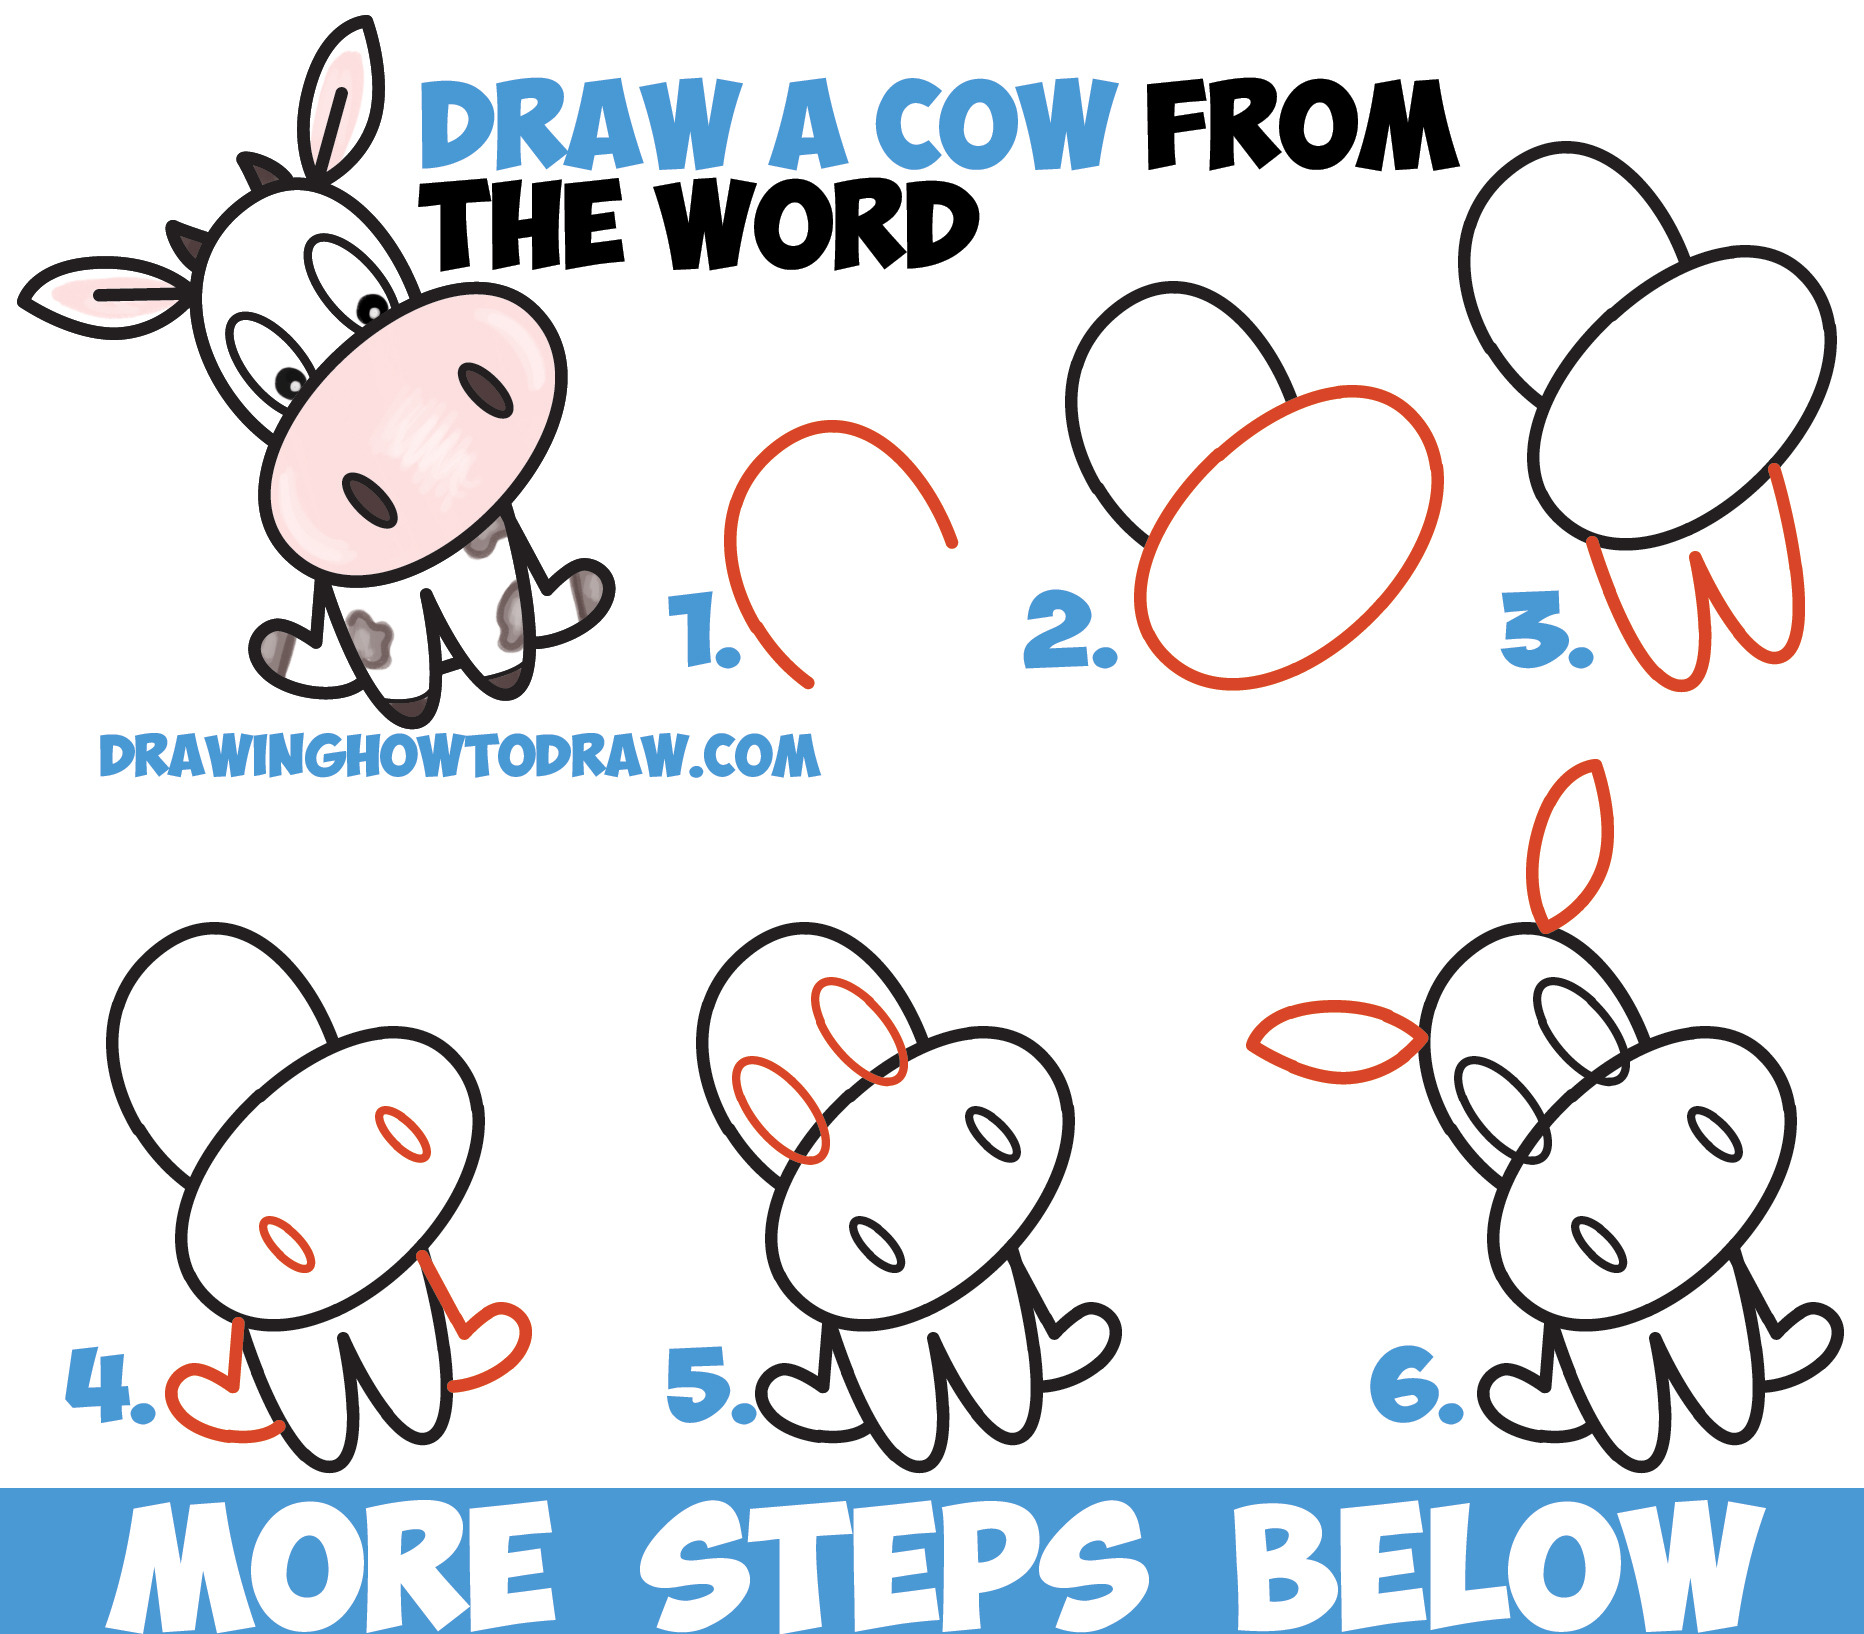 how to draw a baby cow step by step